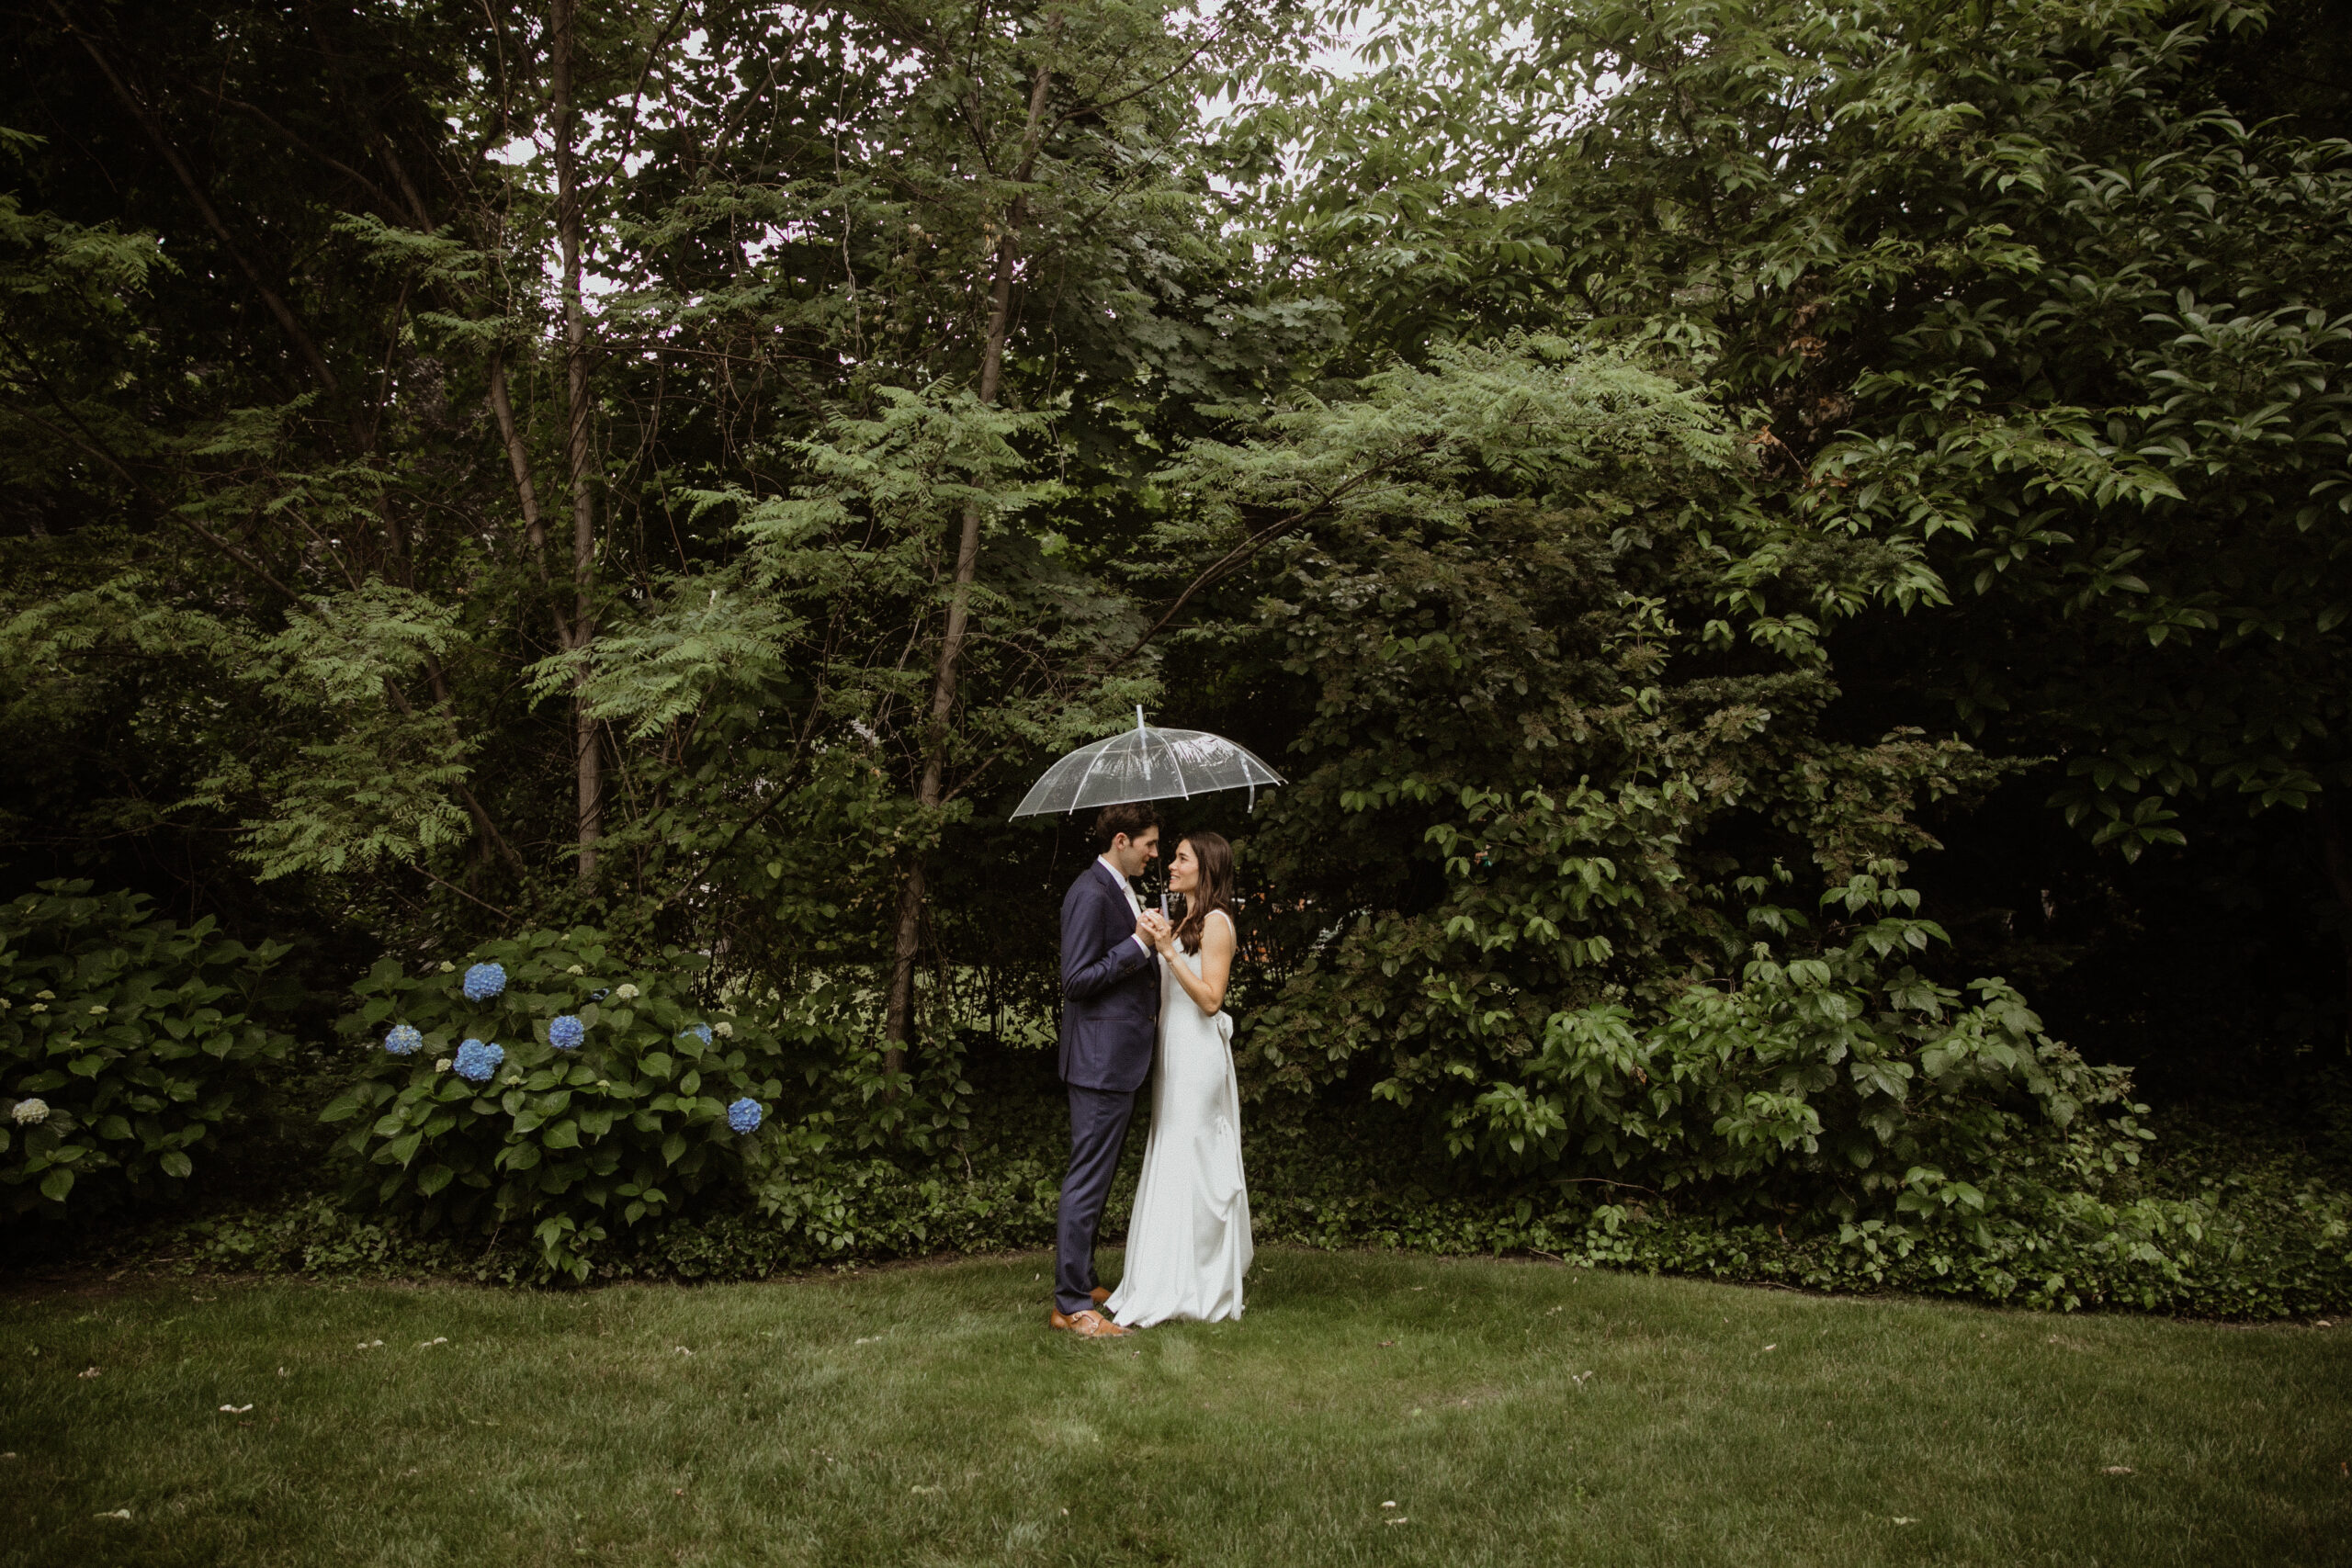 Stunning bride and groom pose together with the Long Island Nature in the background